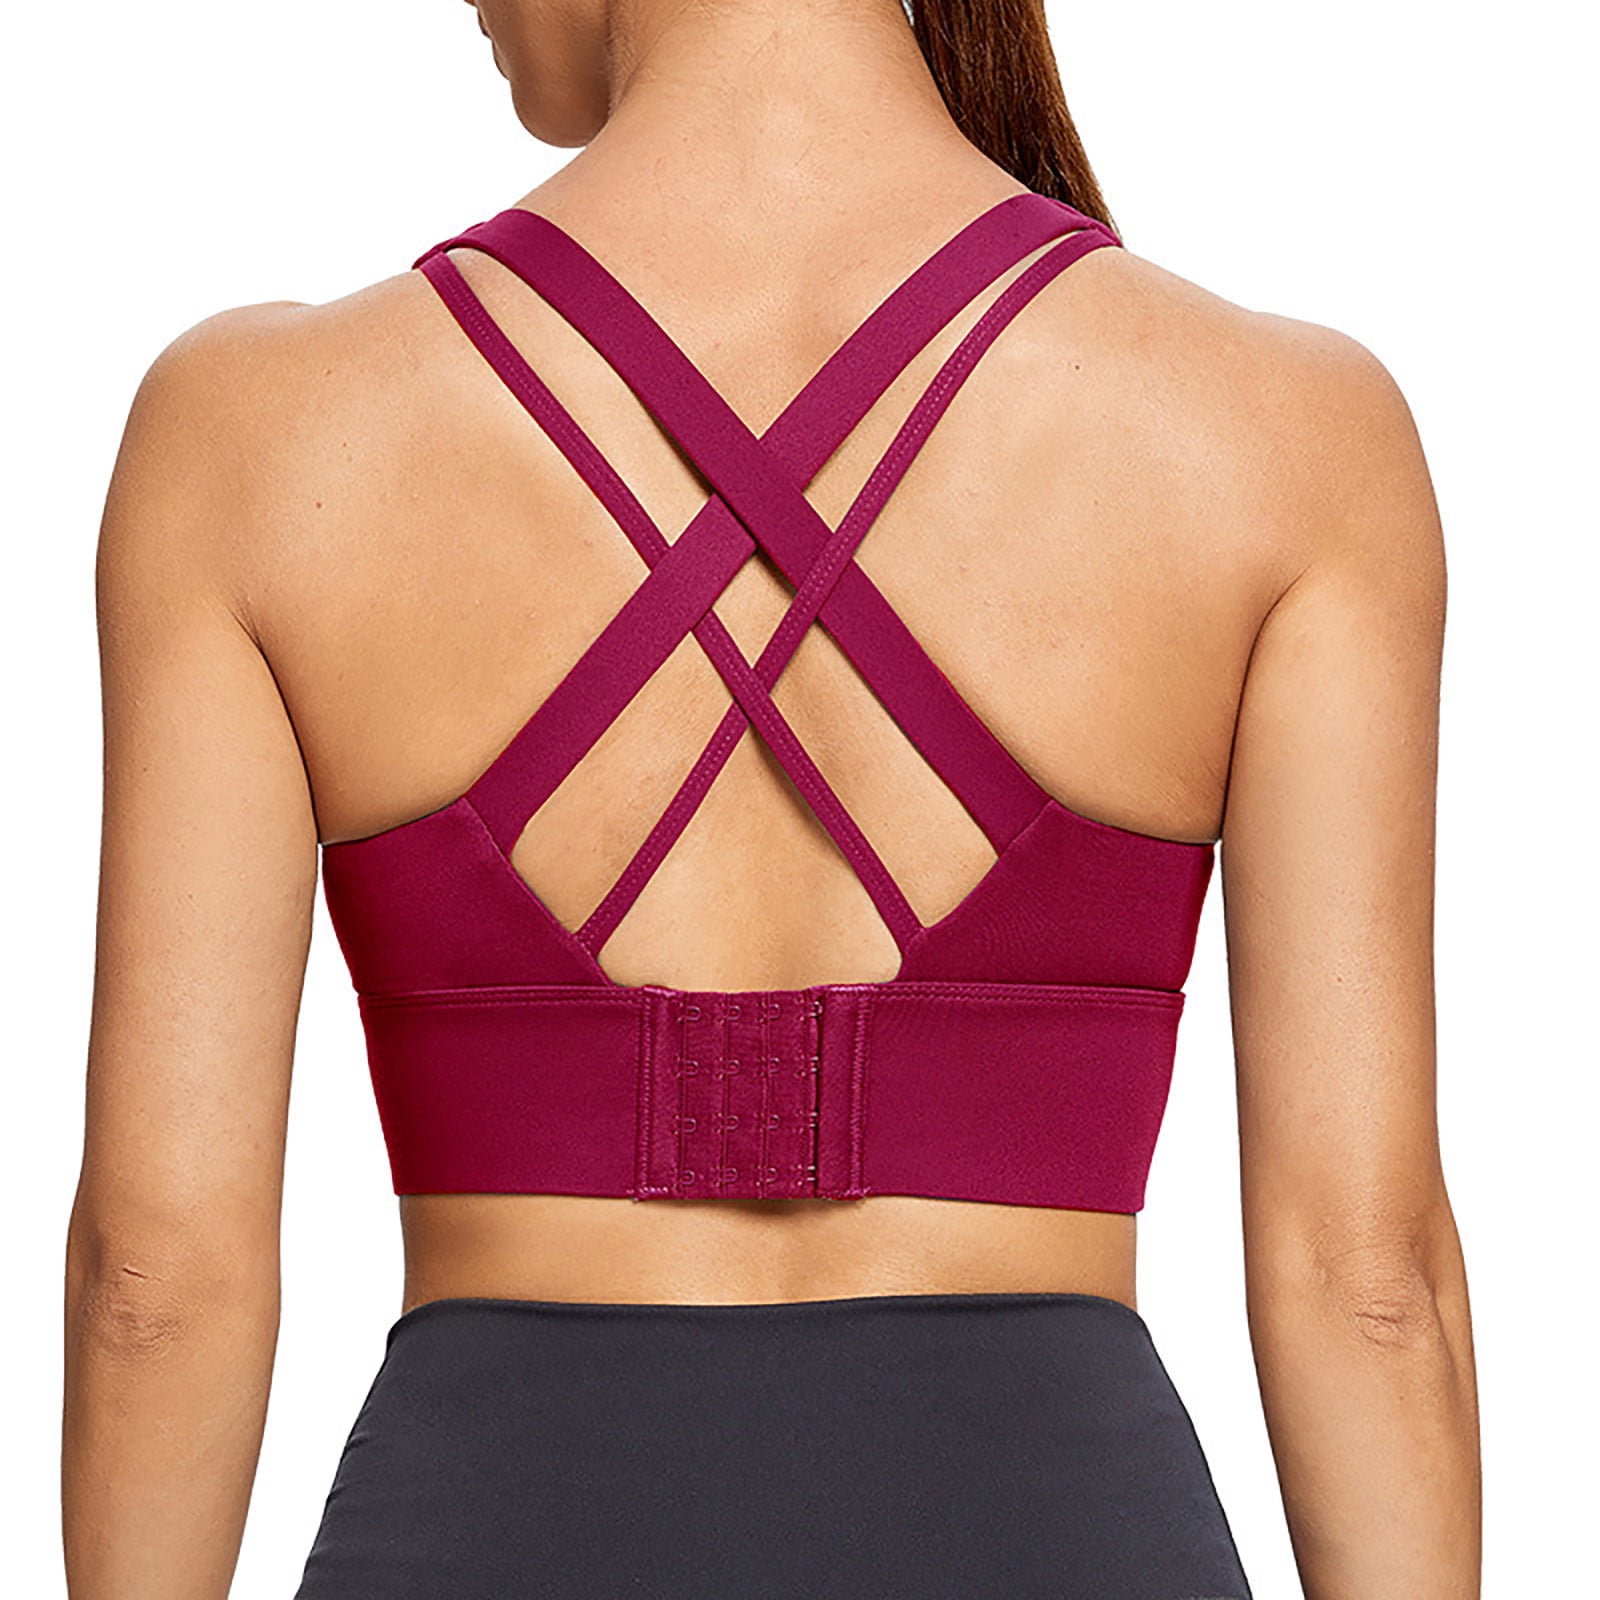 L 2026 Women Sports Bra Yoga Outfits Sexy Cross Strap Tank Classic Lady  Underwear Fashion Runing Tops Fitness Vest With Removable Cups From  Wslly104104, $12.59